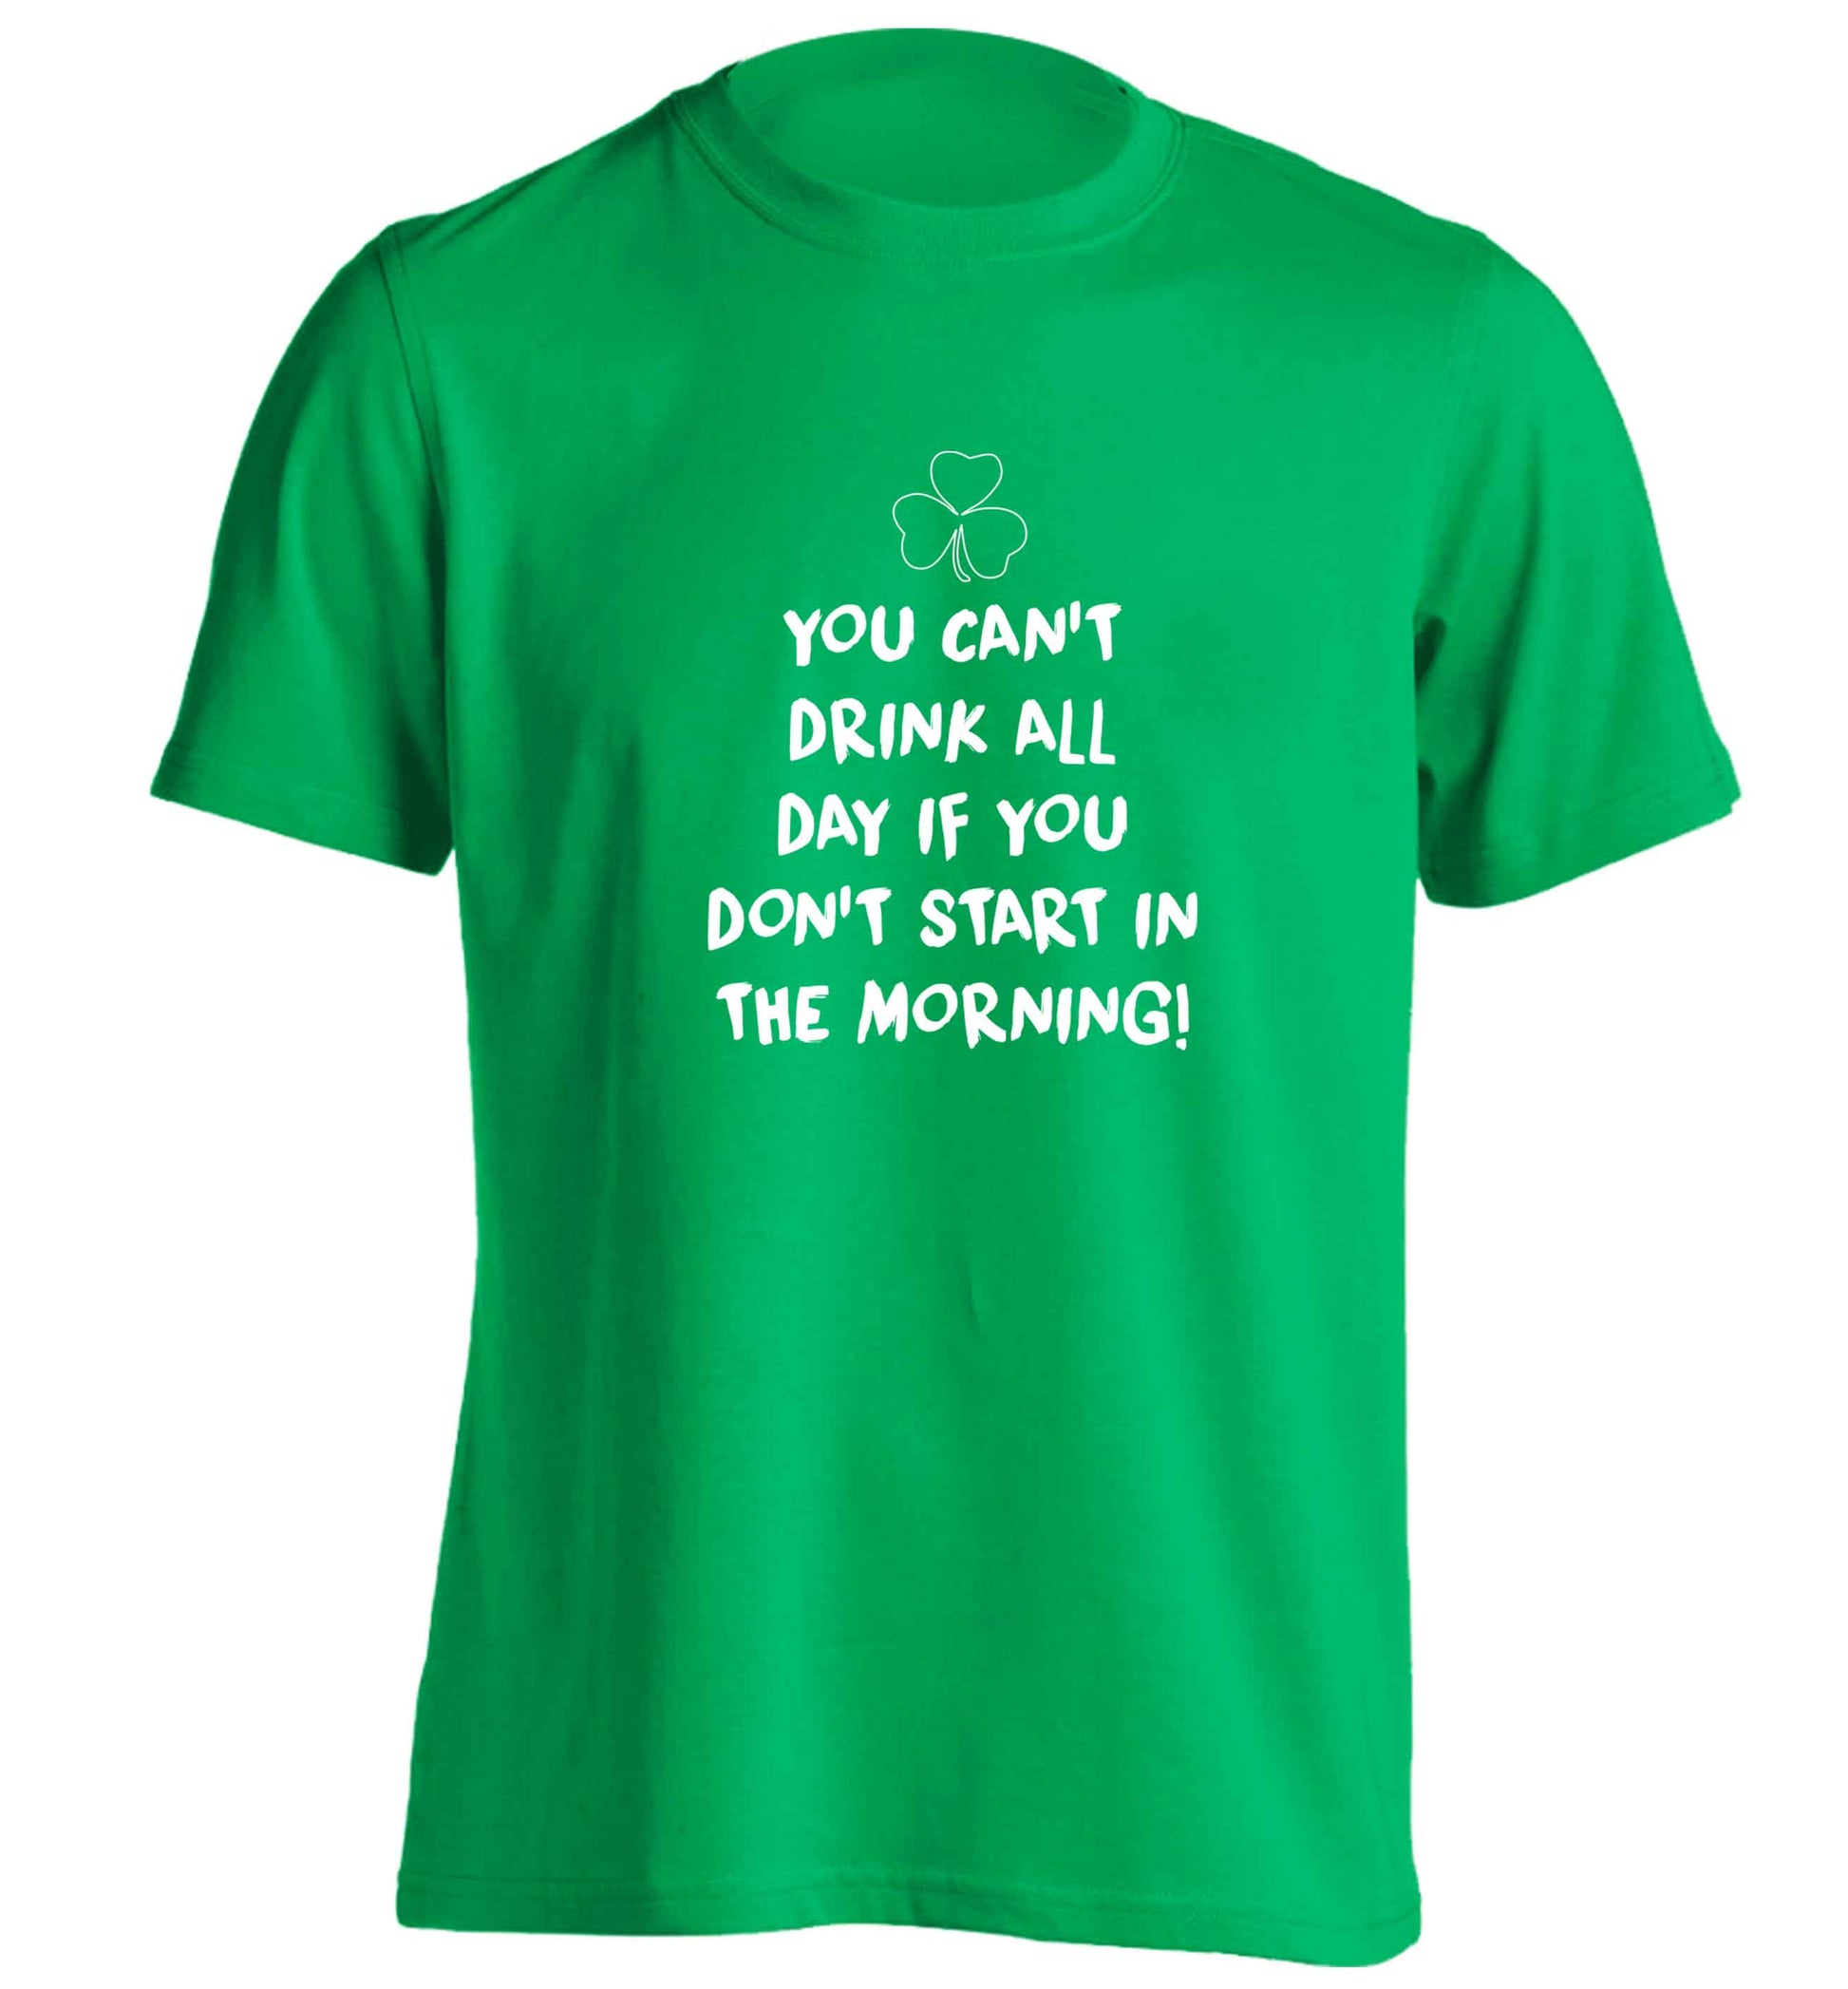 You can't drink all day if you don't start in the morning adults unisex green Tshirt 2XL